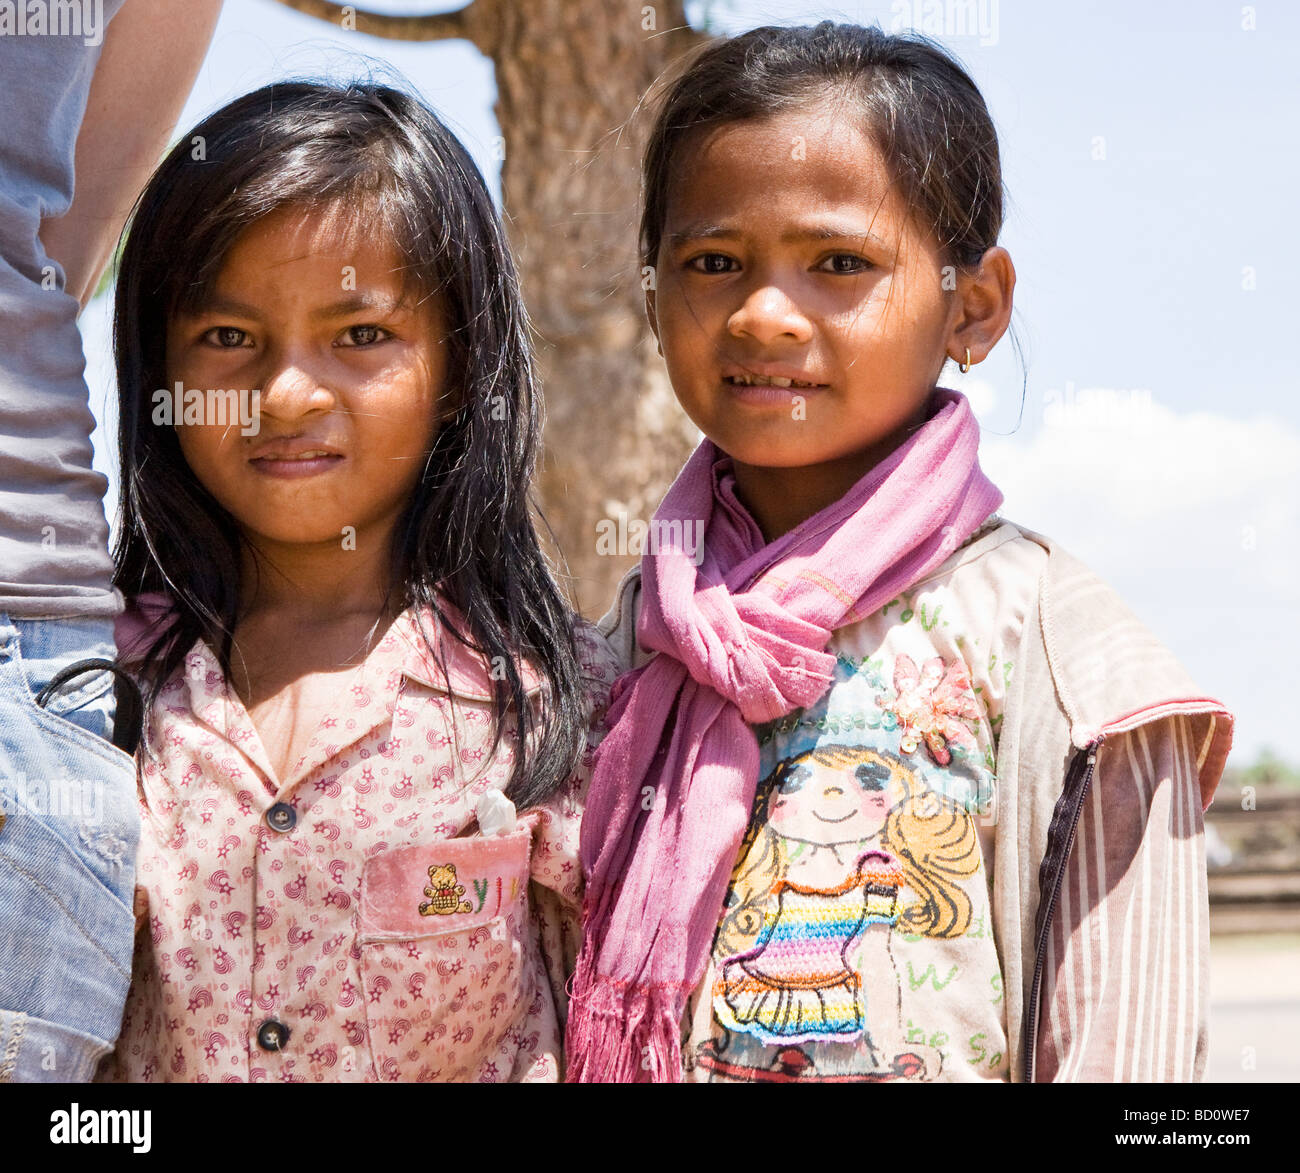 Two young girls selling souvenirs outside Angkor Wat Stock Photo